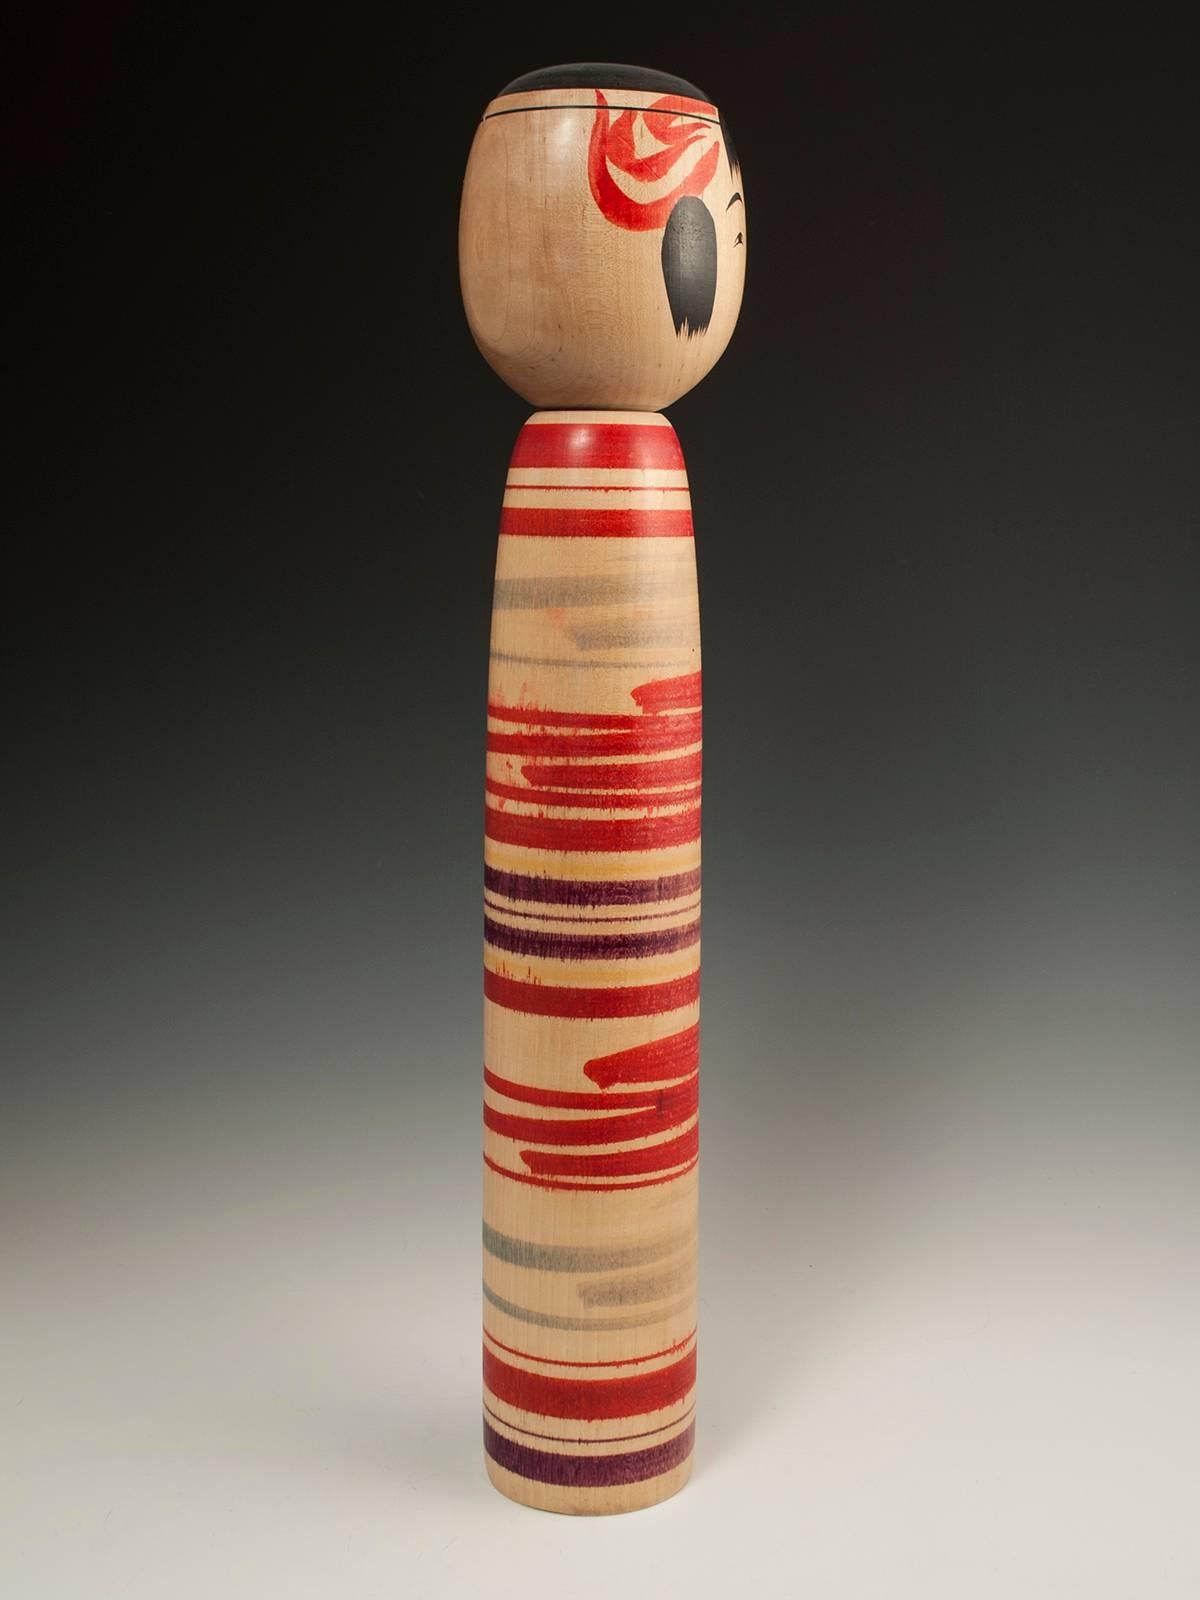 Midcentury traditional Kokeshi doll from Tsuchiyu, Japan

A large classic traditional kokeshi doll signed by Watanabe Chuzo
Kokeshi from the Tsuchiyu area of Japan are characteristically decorated with stripes, which are hand-painted in water color